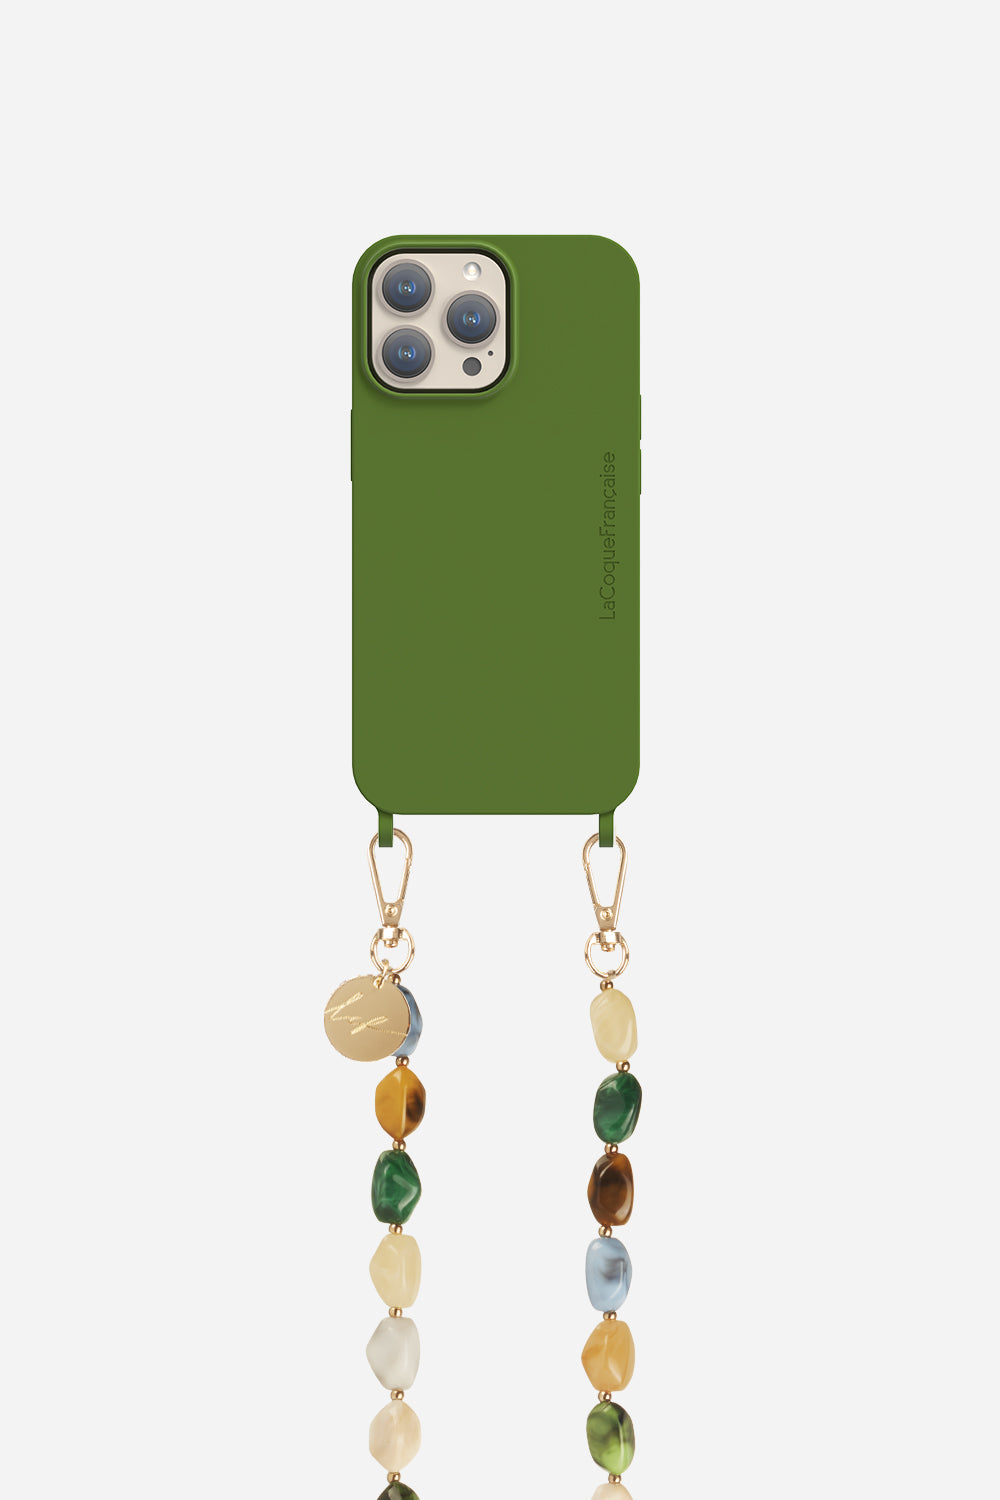 Polly chain and green shell